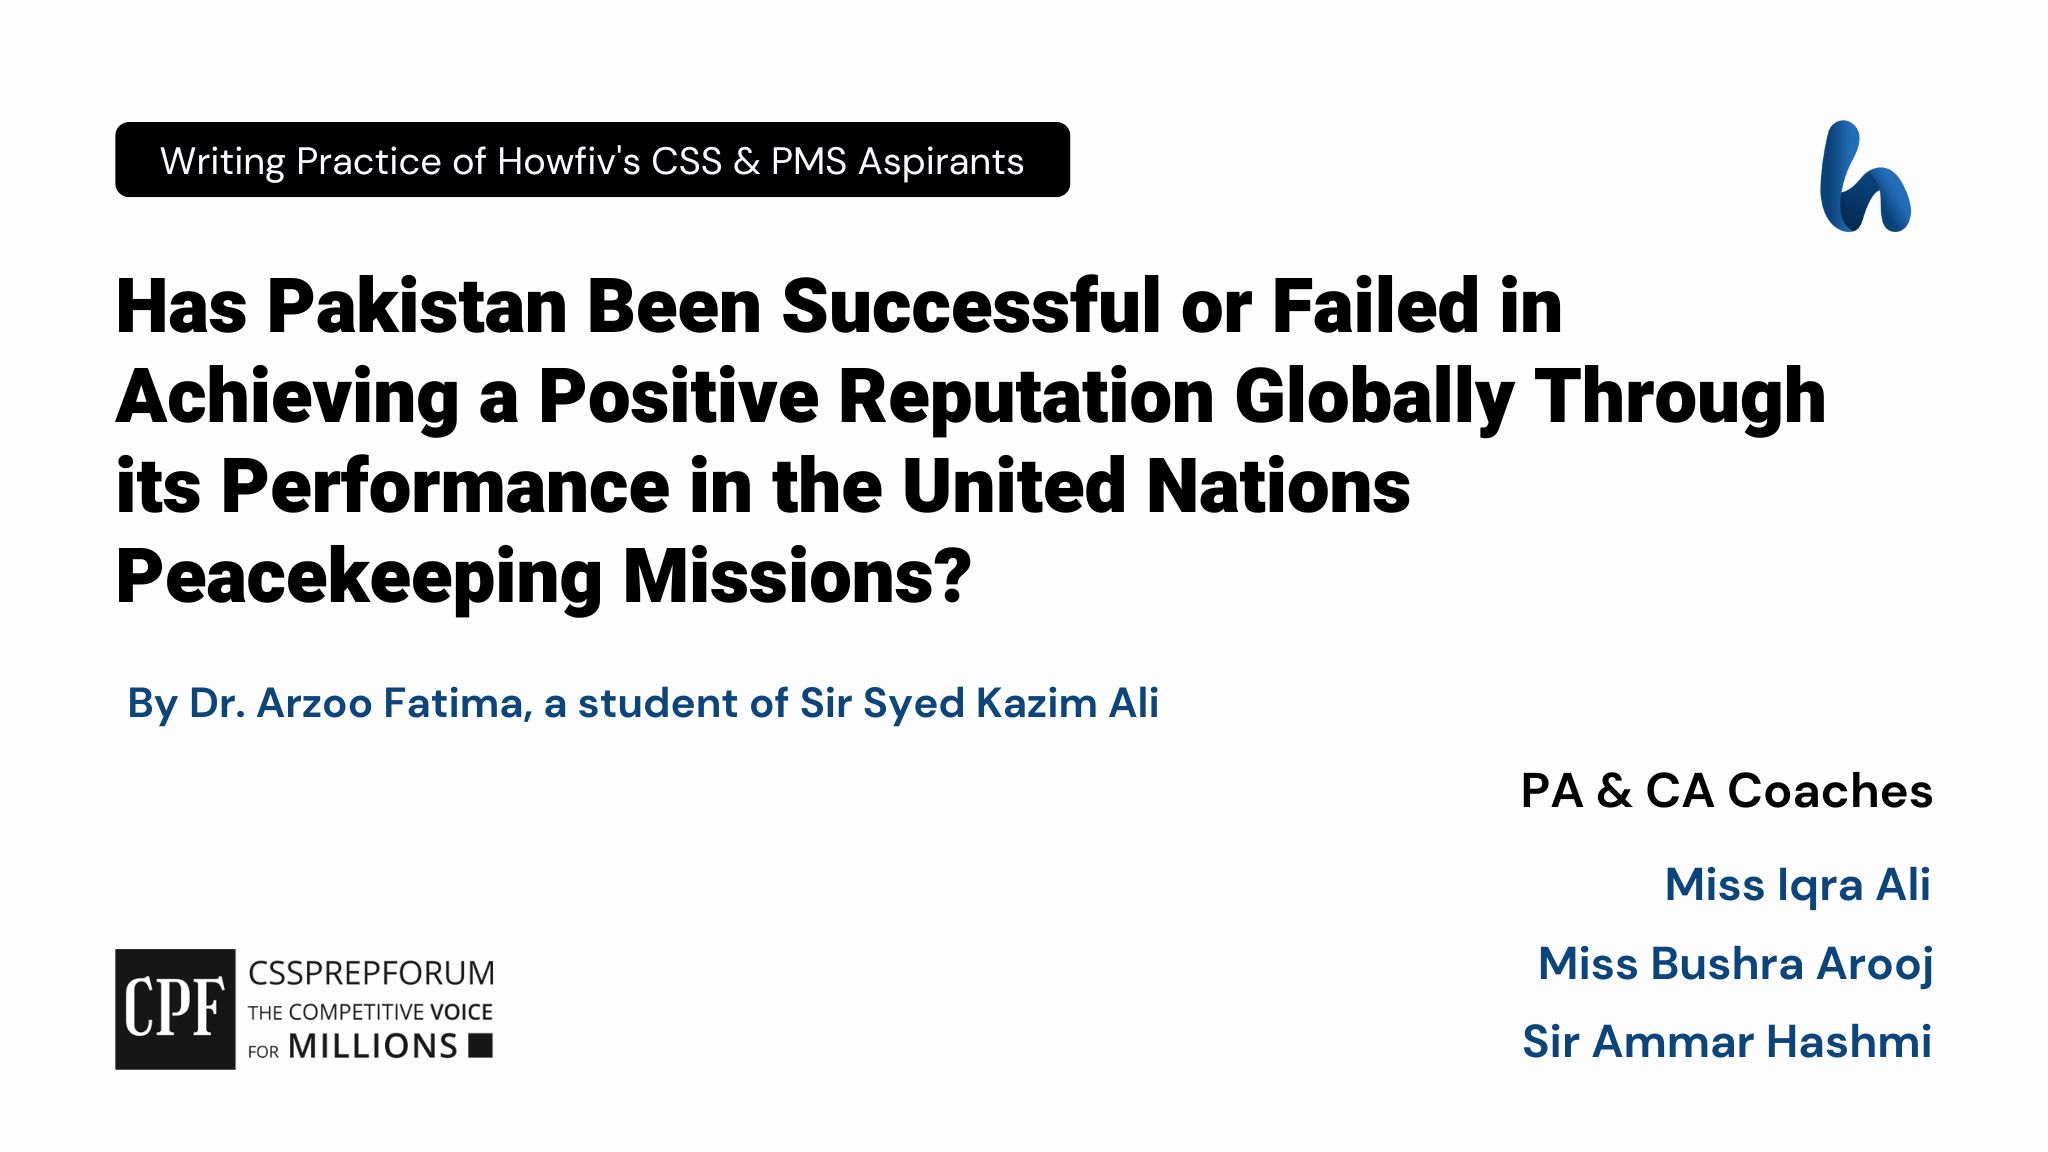 Has Pakistan Been Successful or Failed in Achieving a Positive Reputation Globally Through its Performance in the United Nations Peacekeeping Missions?